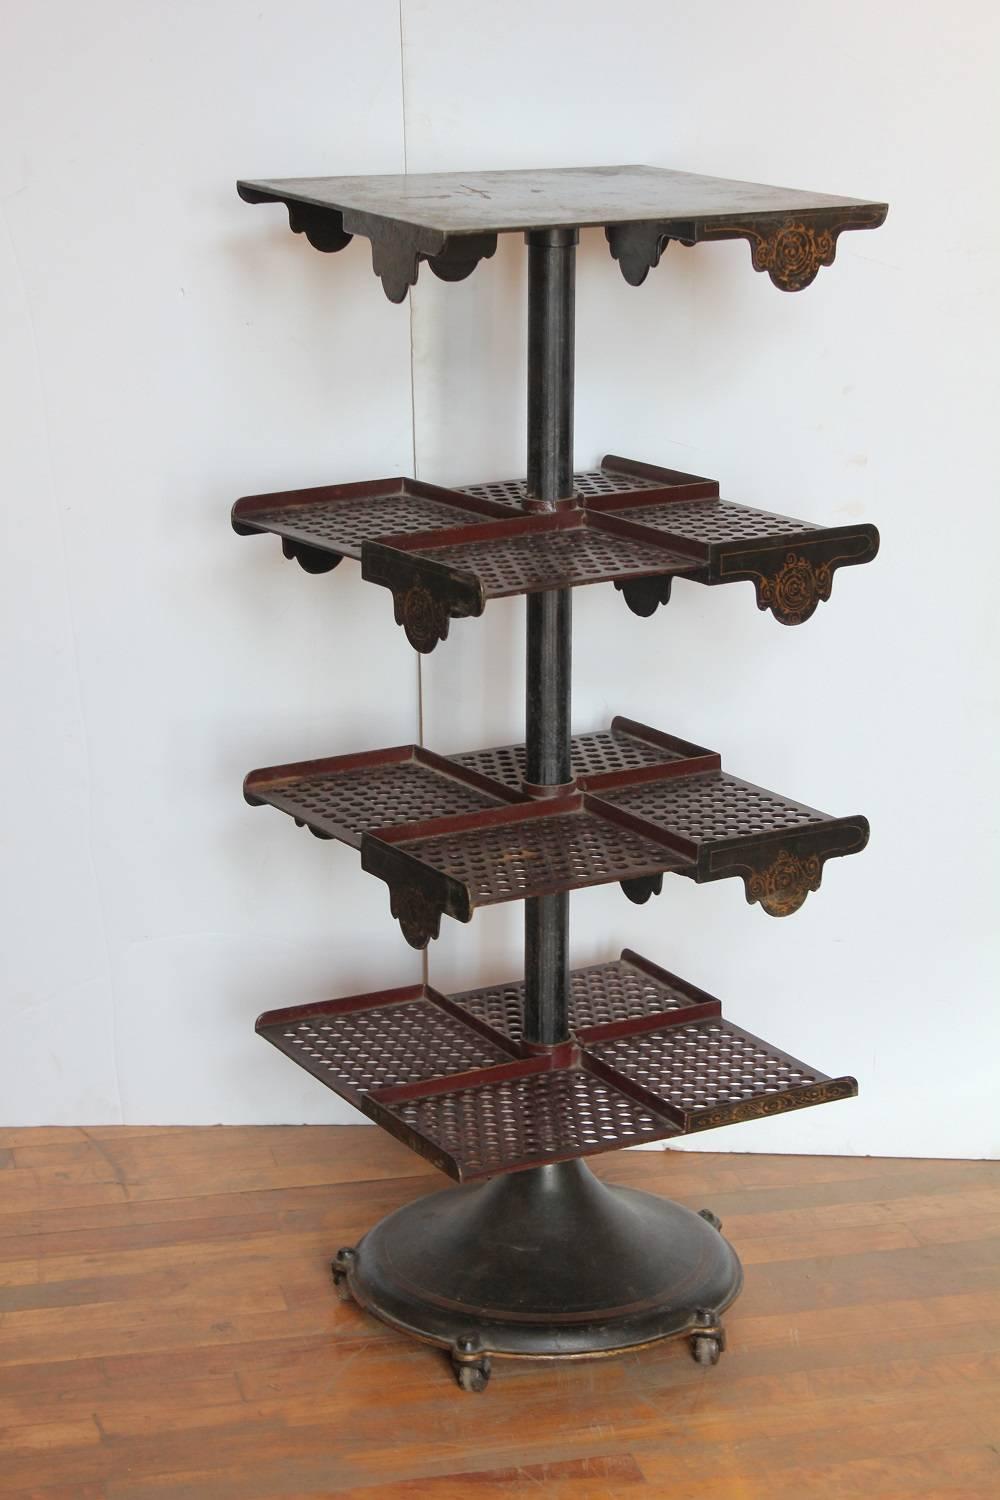 Rare antique cast iron revolving bookstand with original stencils. It has three cast iron perforated and divided shelves. Height is adjustable.